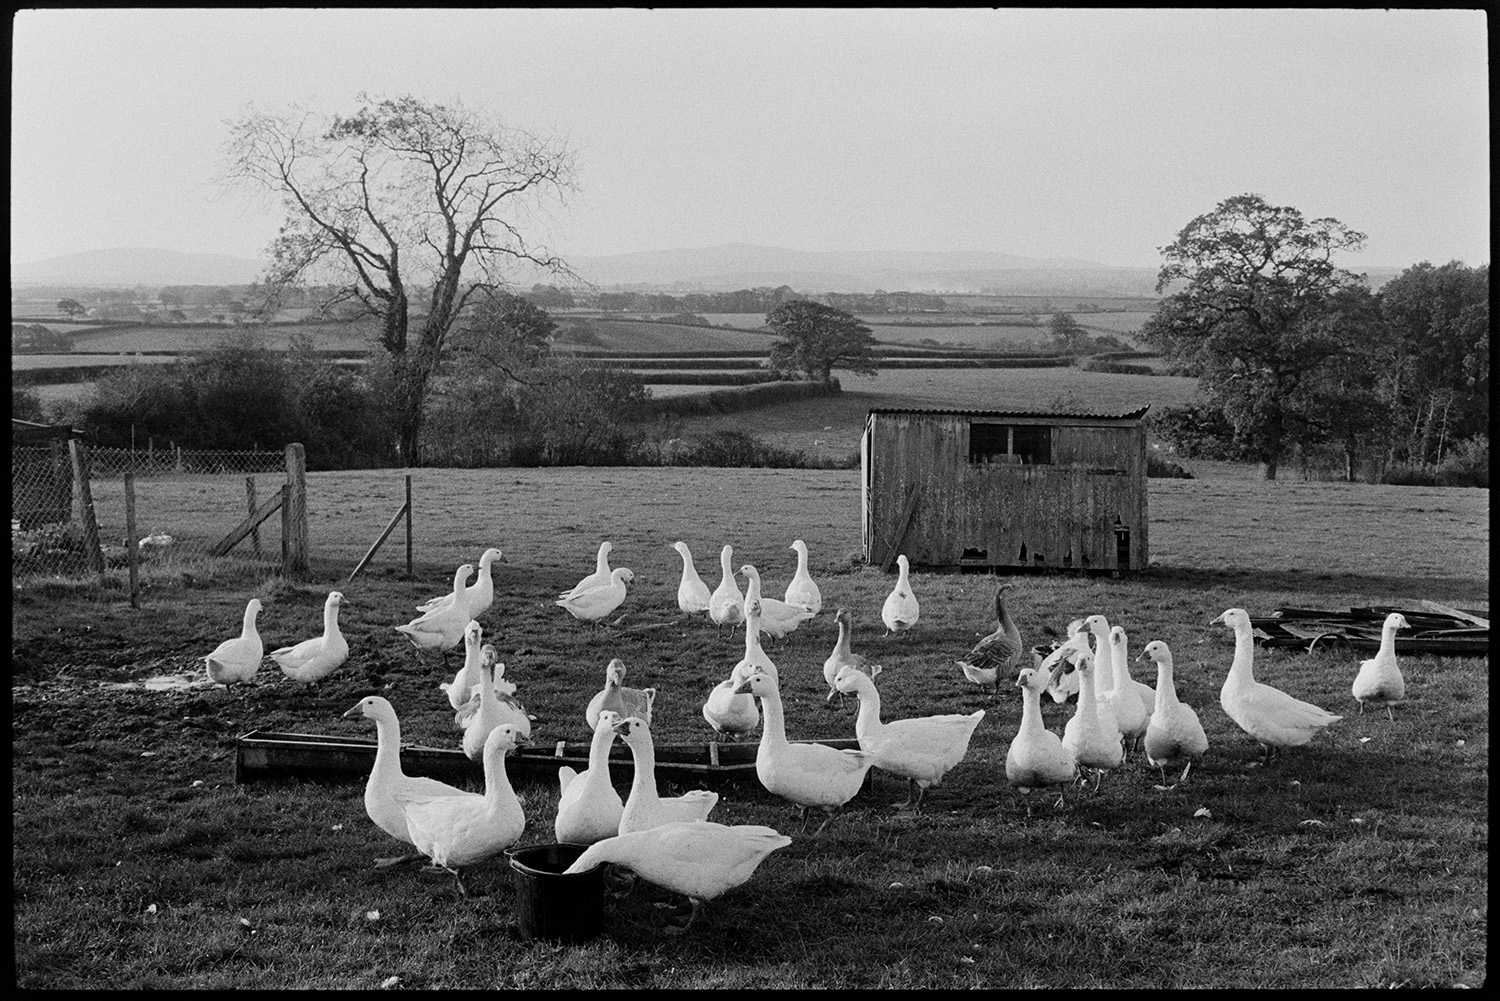 Flock of geese in field for Christmas!
[A flock of geese feeding from a trough in a field at Ingleigh Green, with a wooden shed and a view of surrounding countryside in the background.]